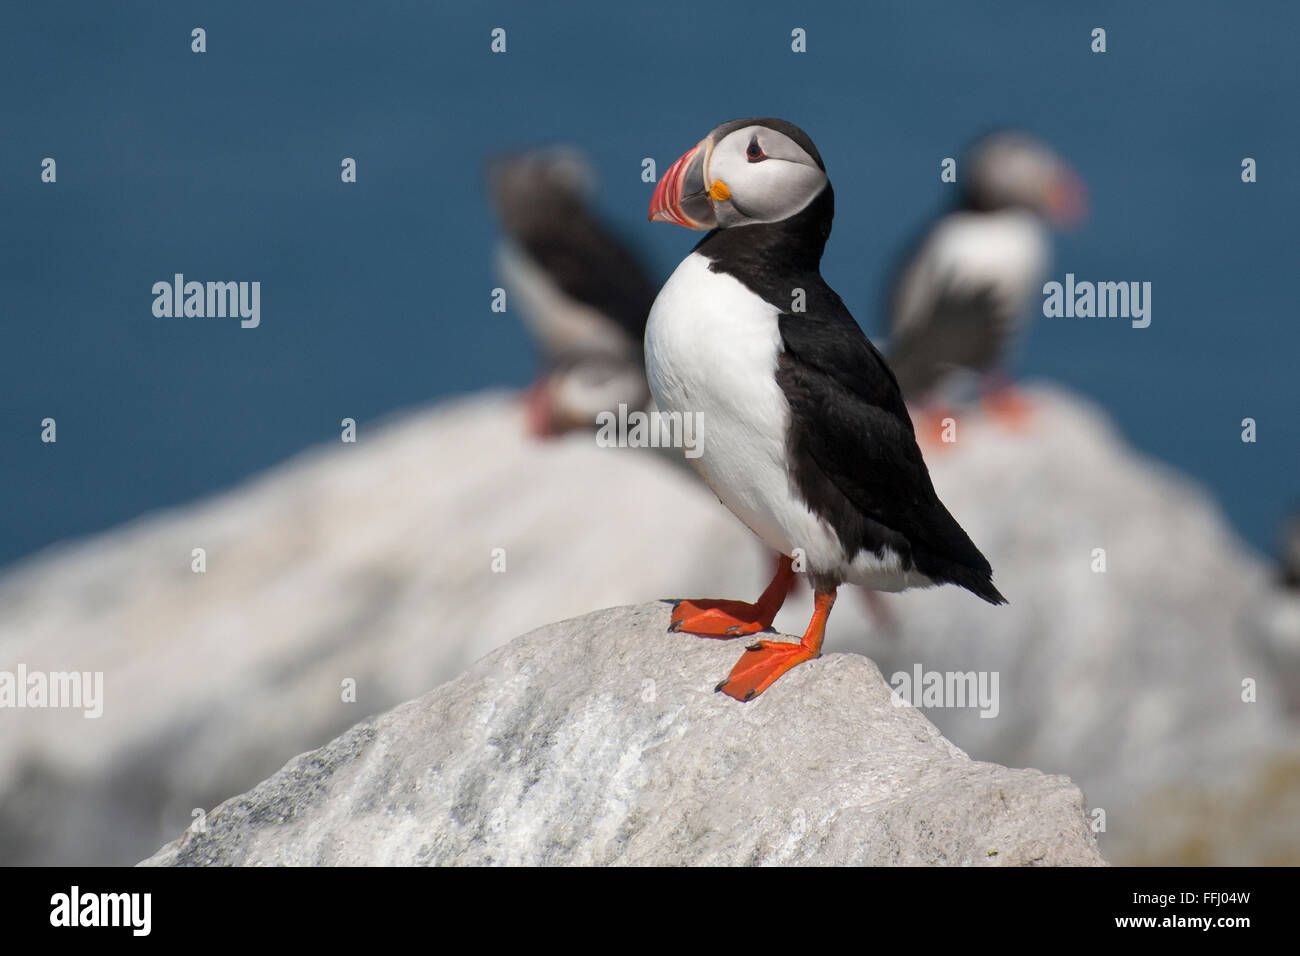 Lone Atlantic puffin bird (fratercula arctica), also referred to as a common puffin, stands guard over its nest on an island in northern Maine. Stock Photo